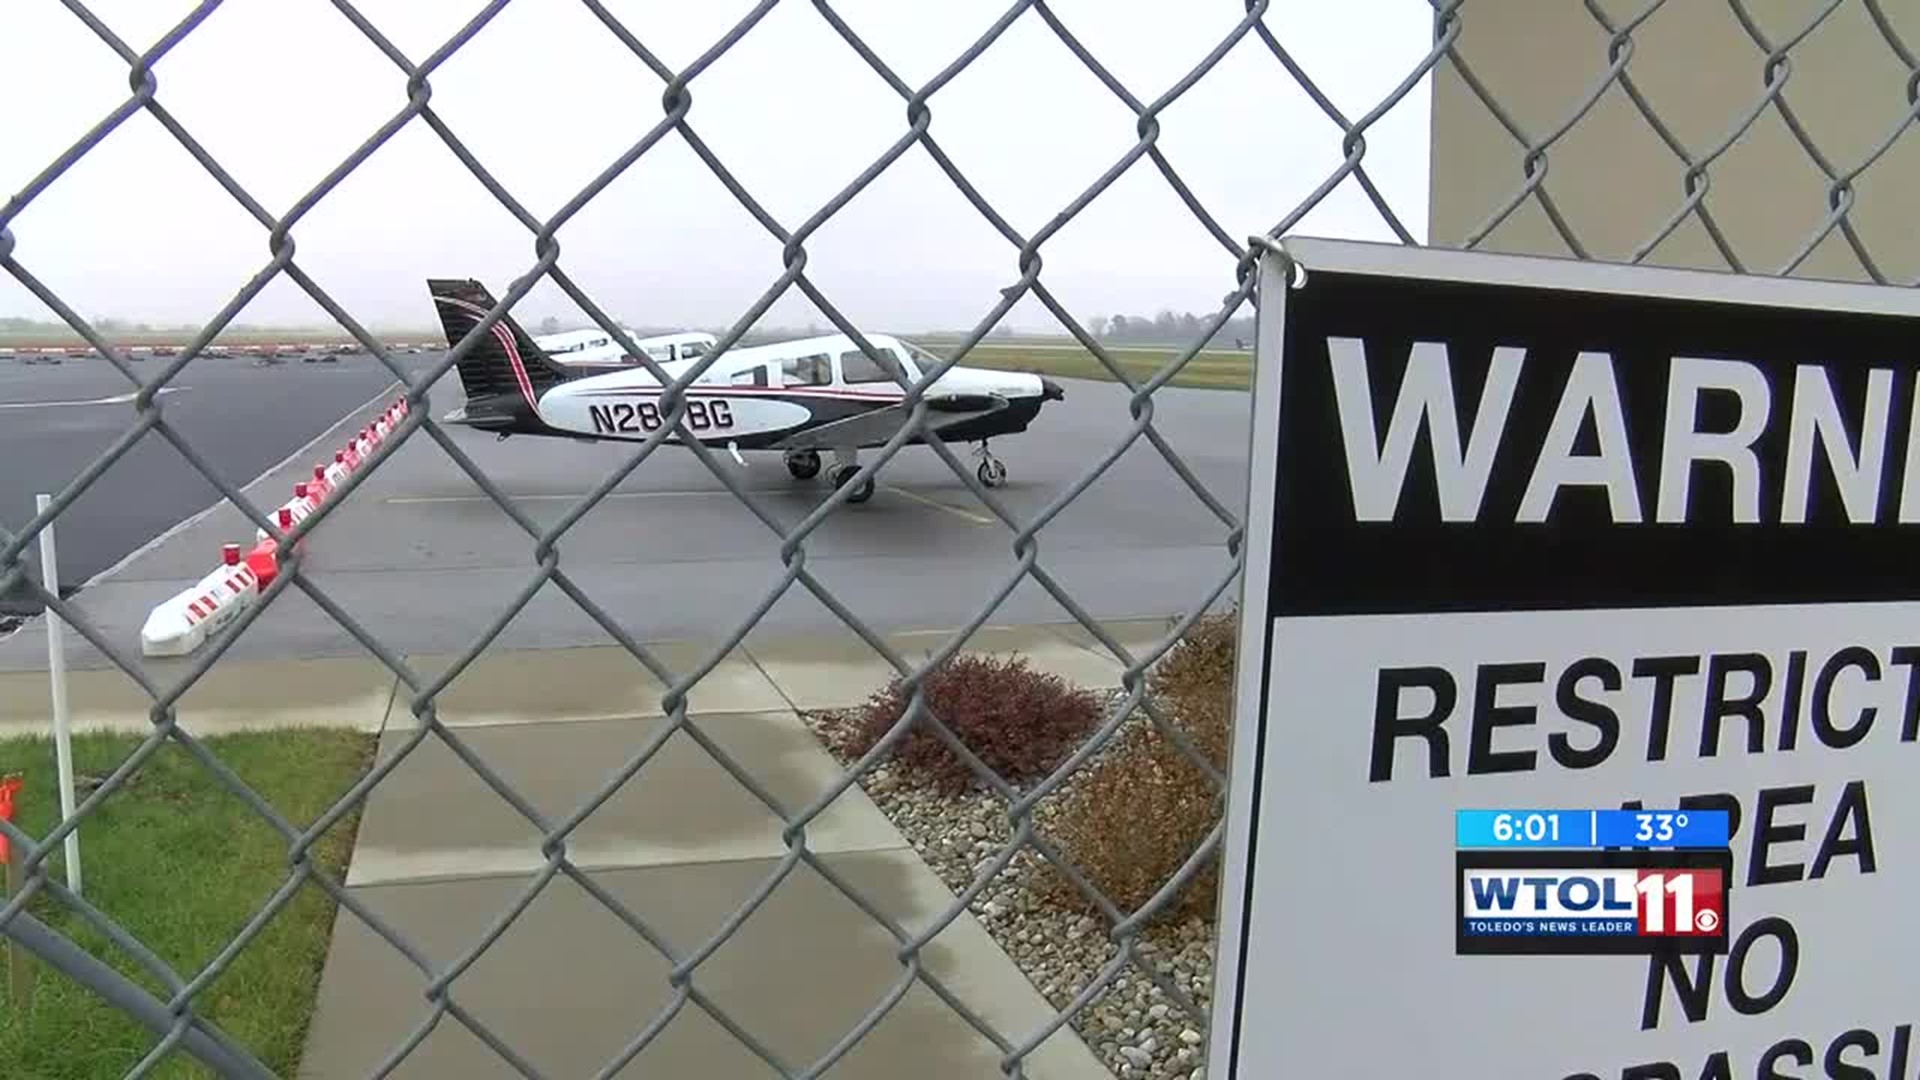 Wood County Airport seeking money from Commissioners for runway re-striping